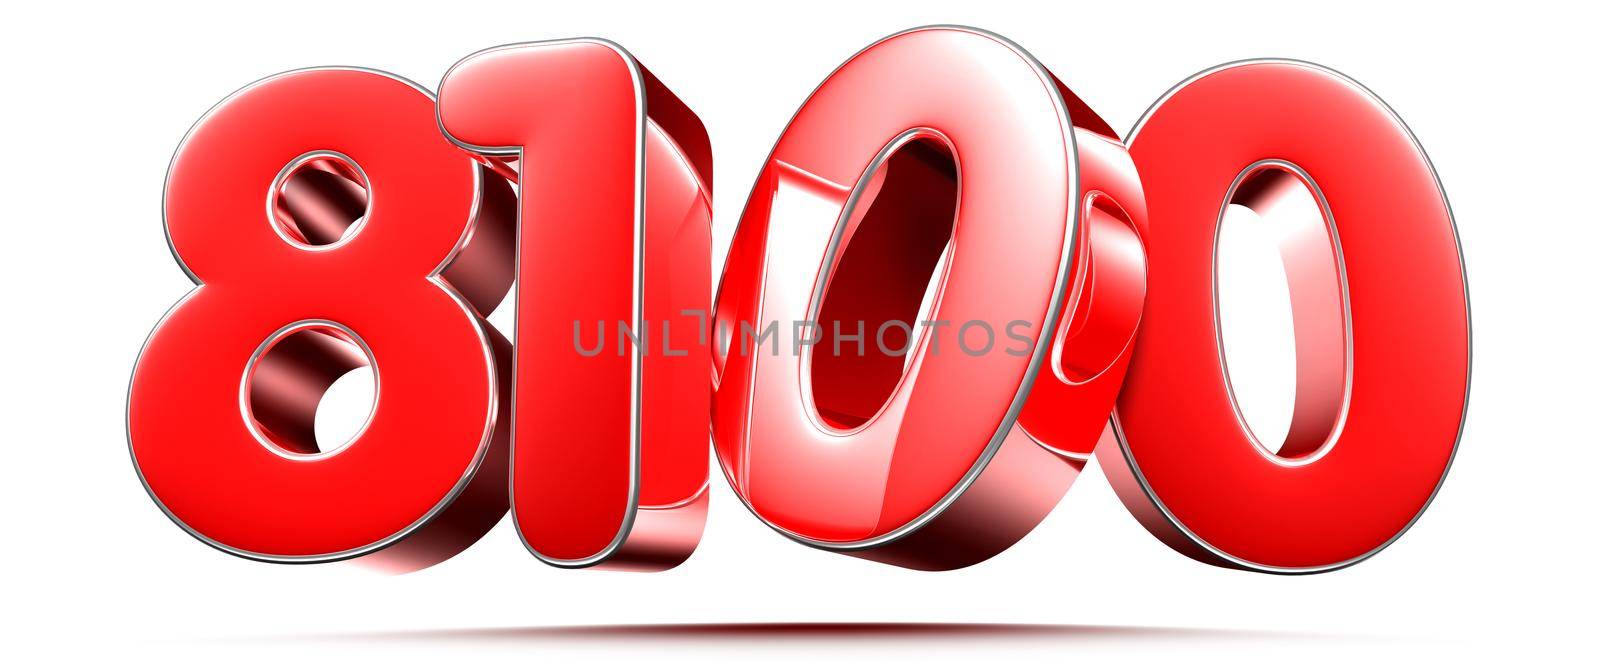 Rounded red numbers 8100 on white background 3D illustration with clipping path by thitimontoyai